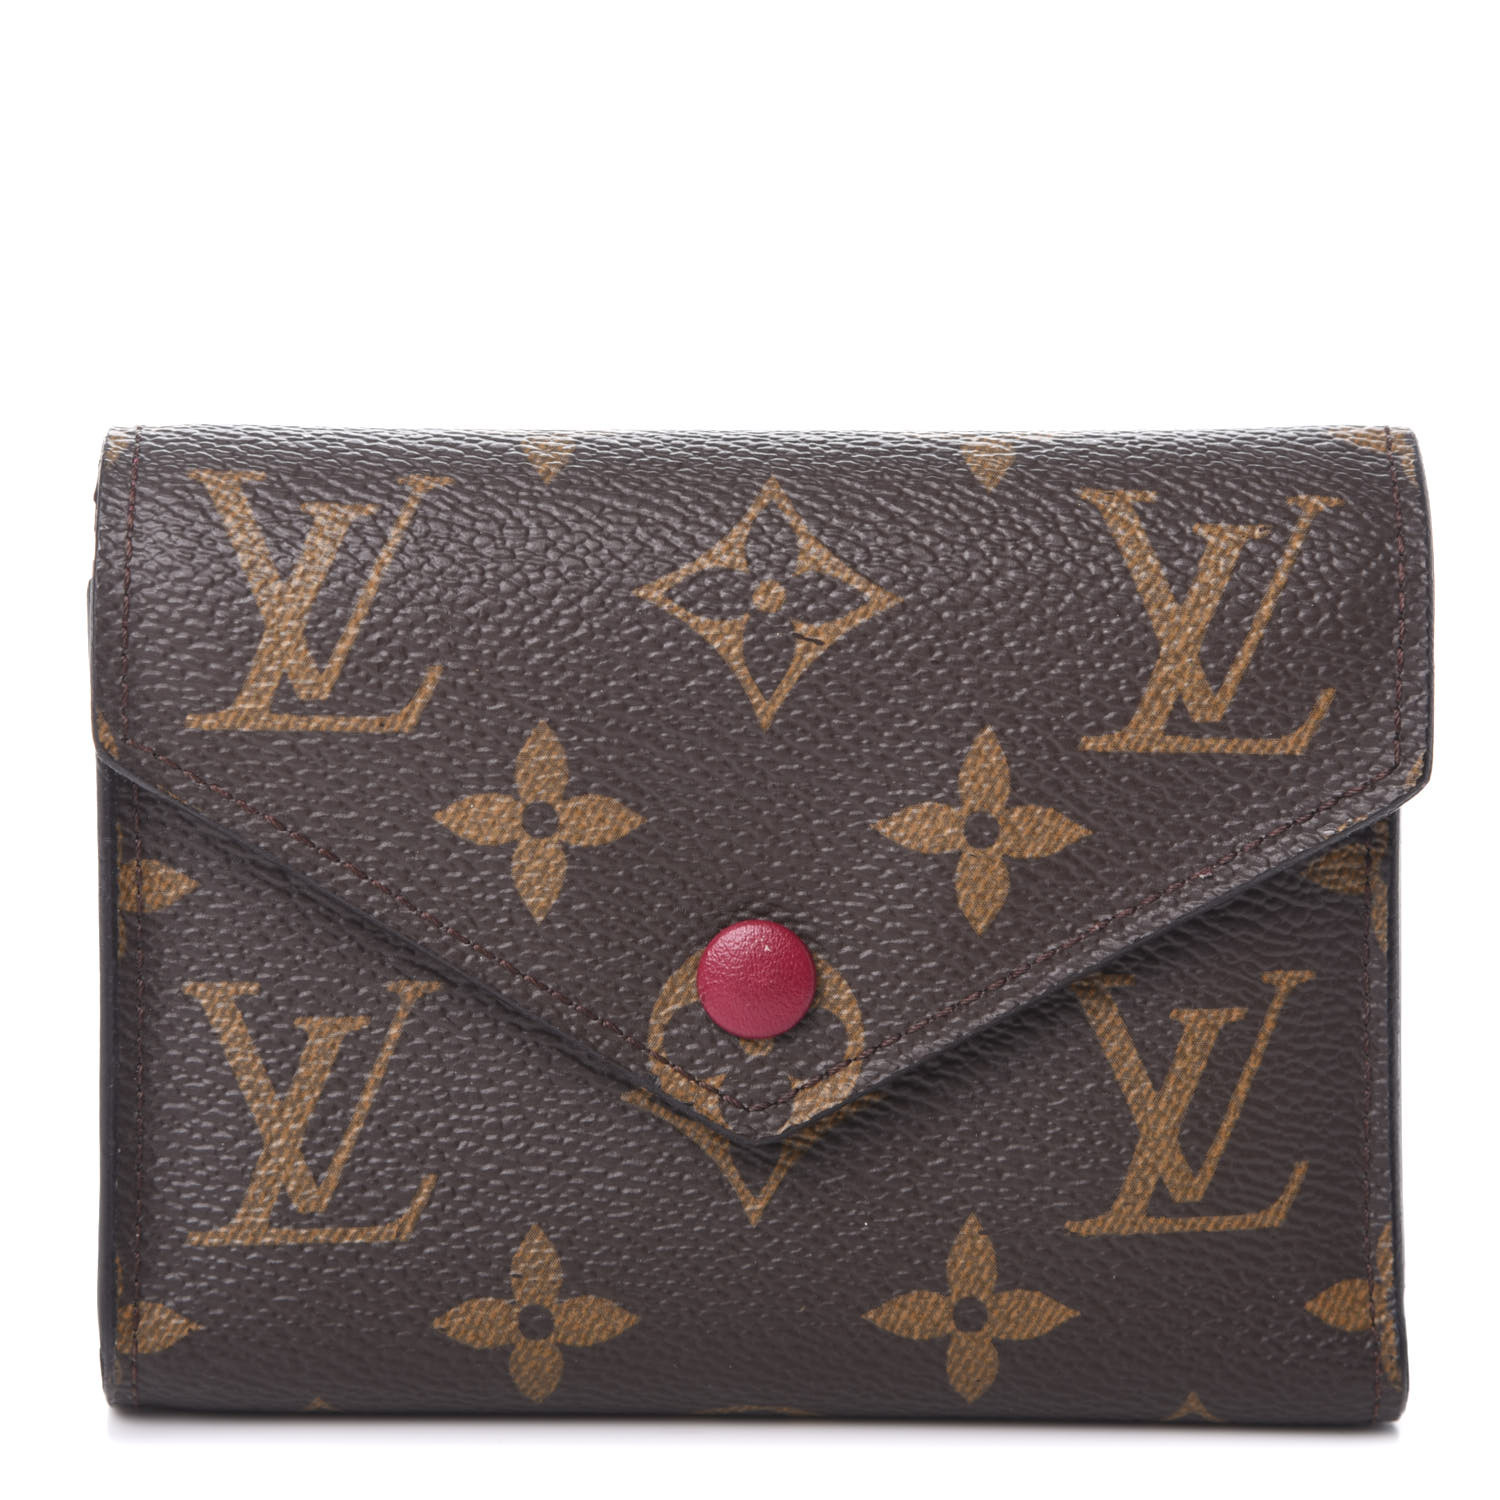 Lv Wallets For Women  Natural Resource Department